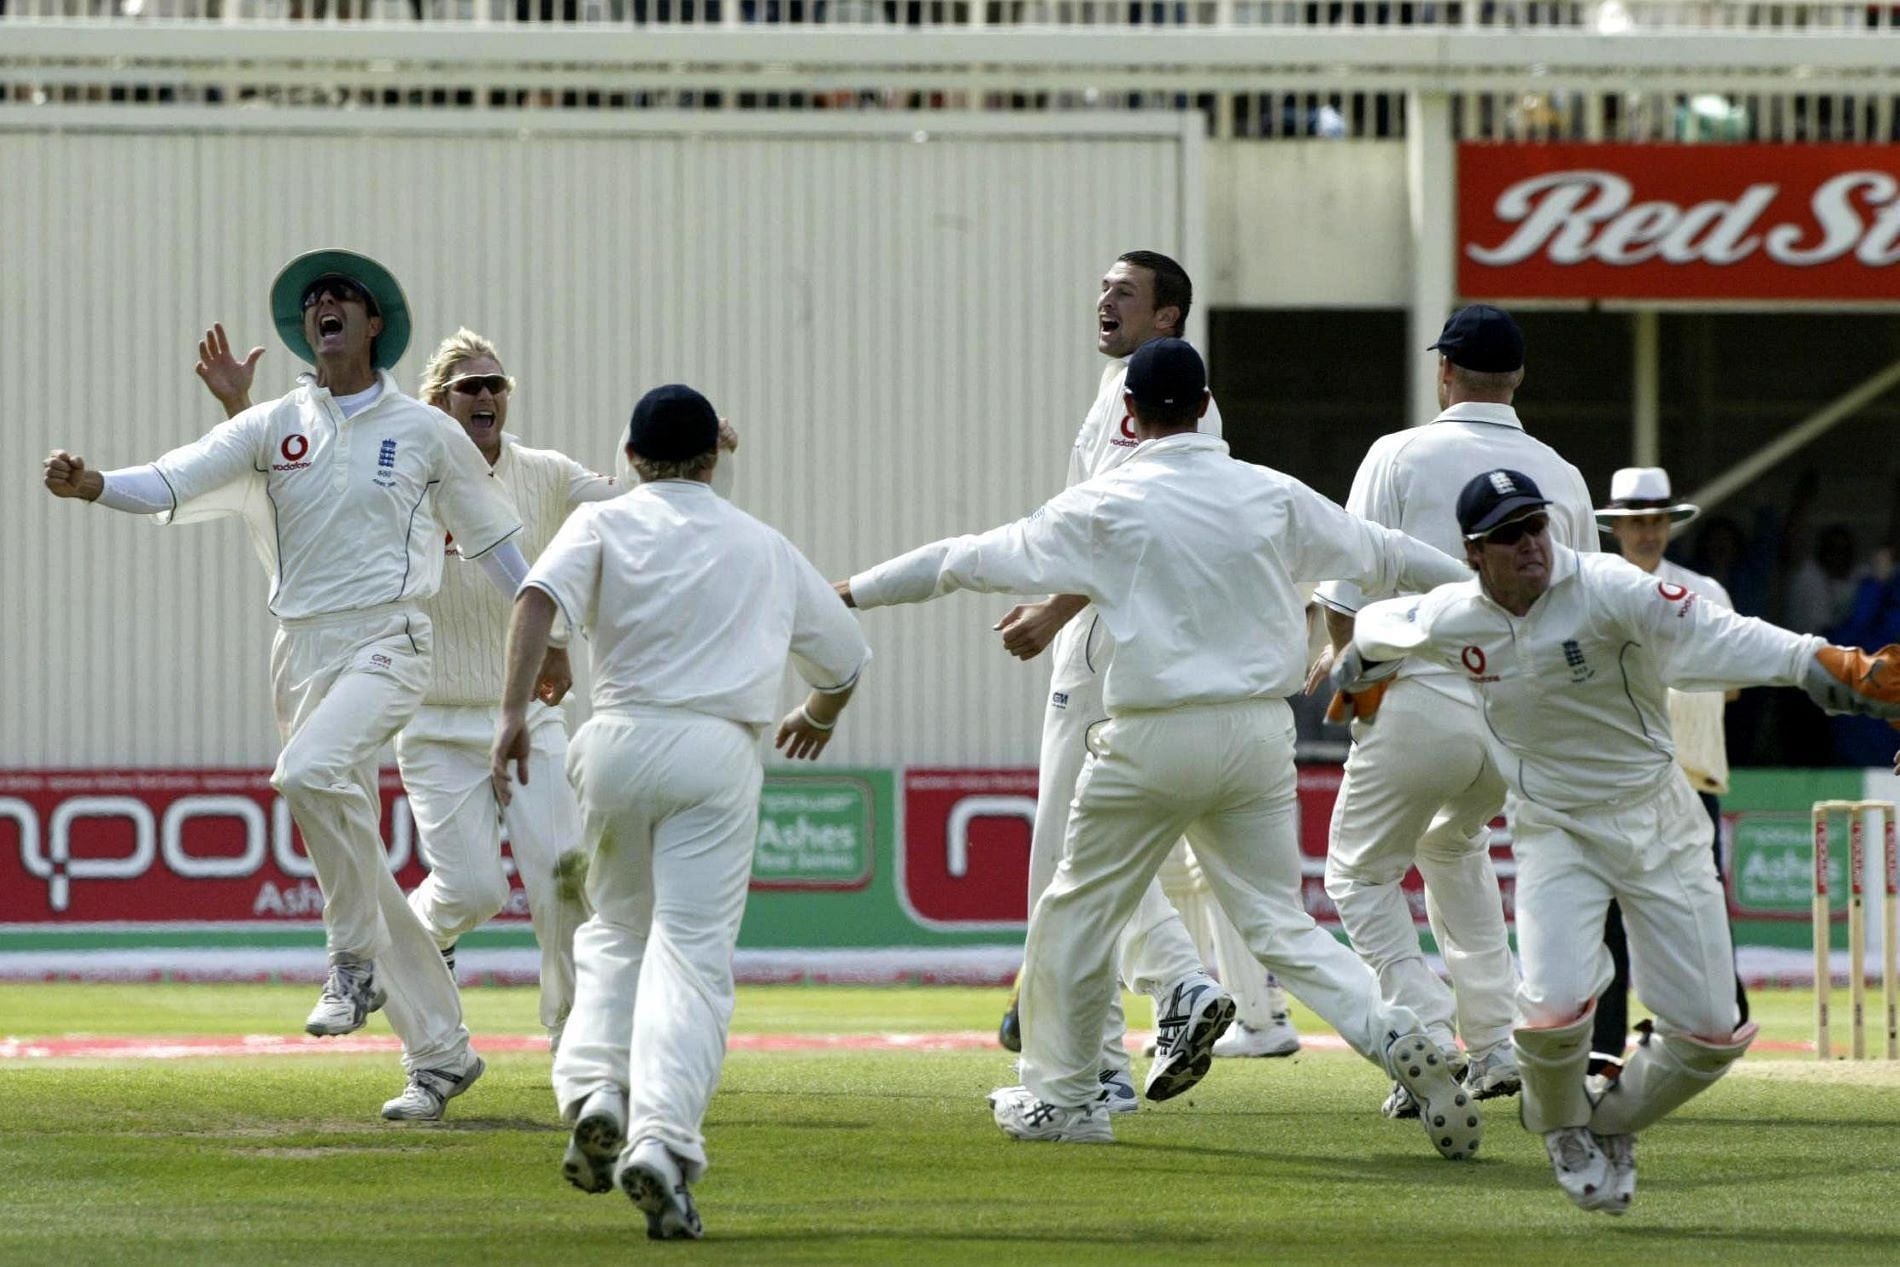 The Edgbaston Test in the 2005 Ashes series remains one for the ages